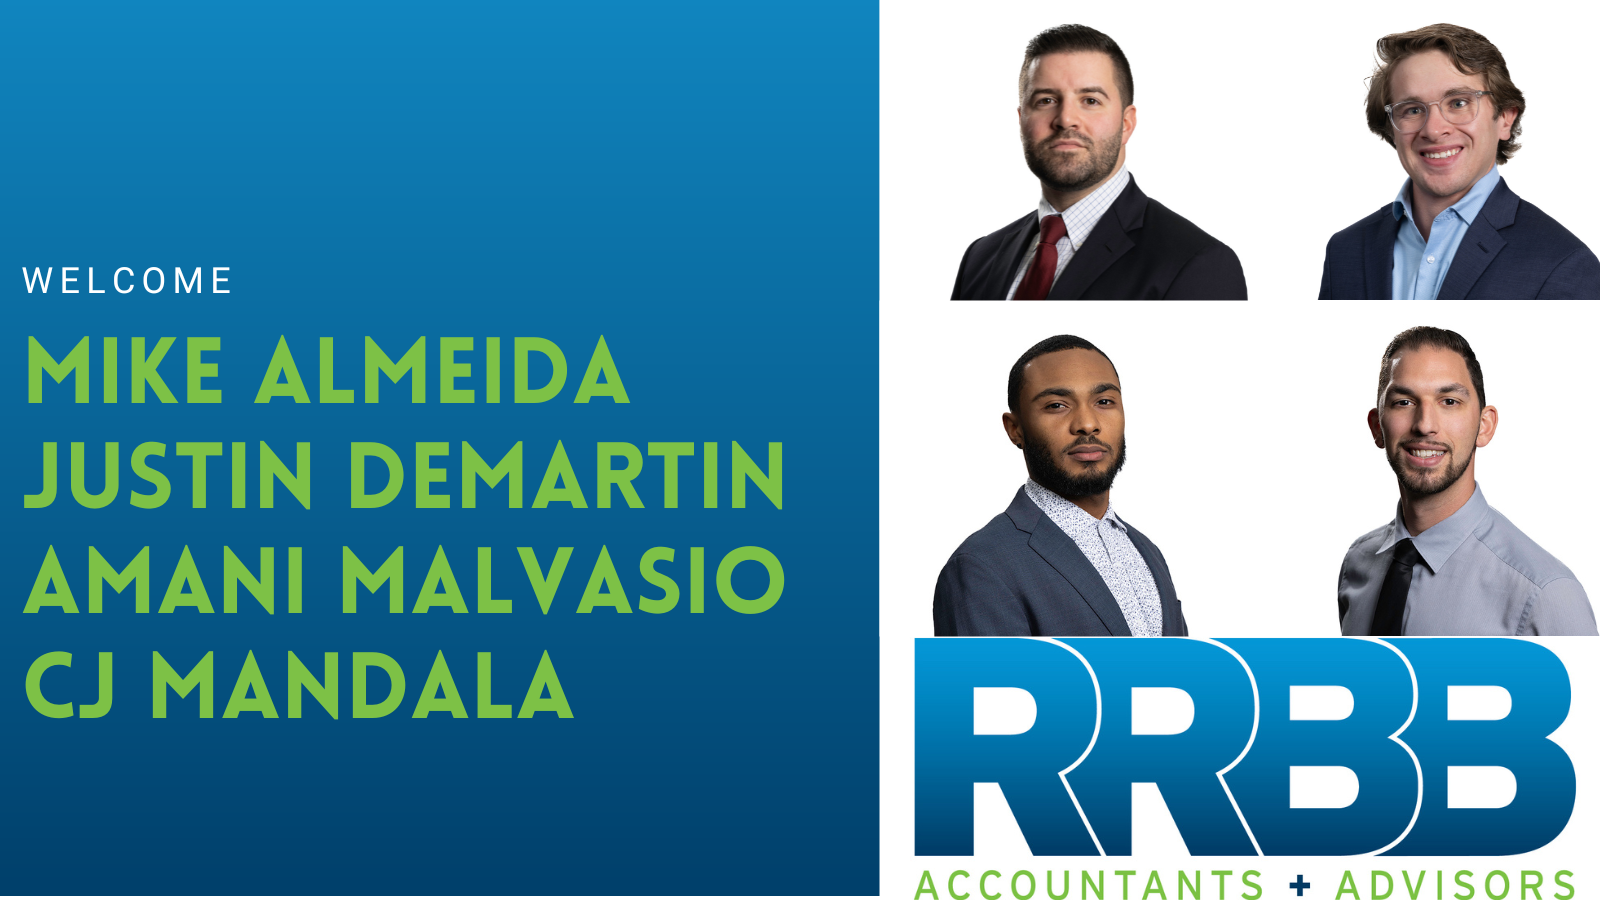 Four More Professionals Join RRBB’s Growing Team Image